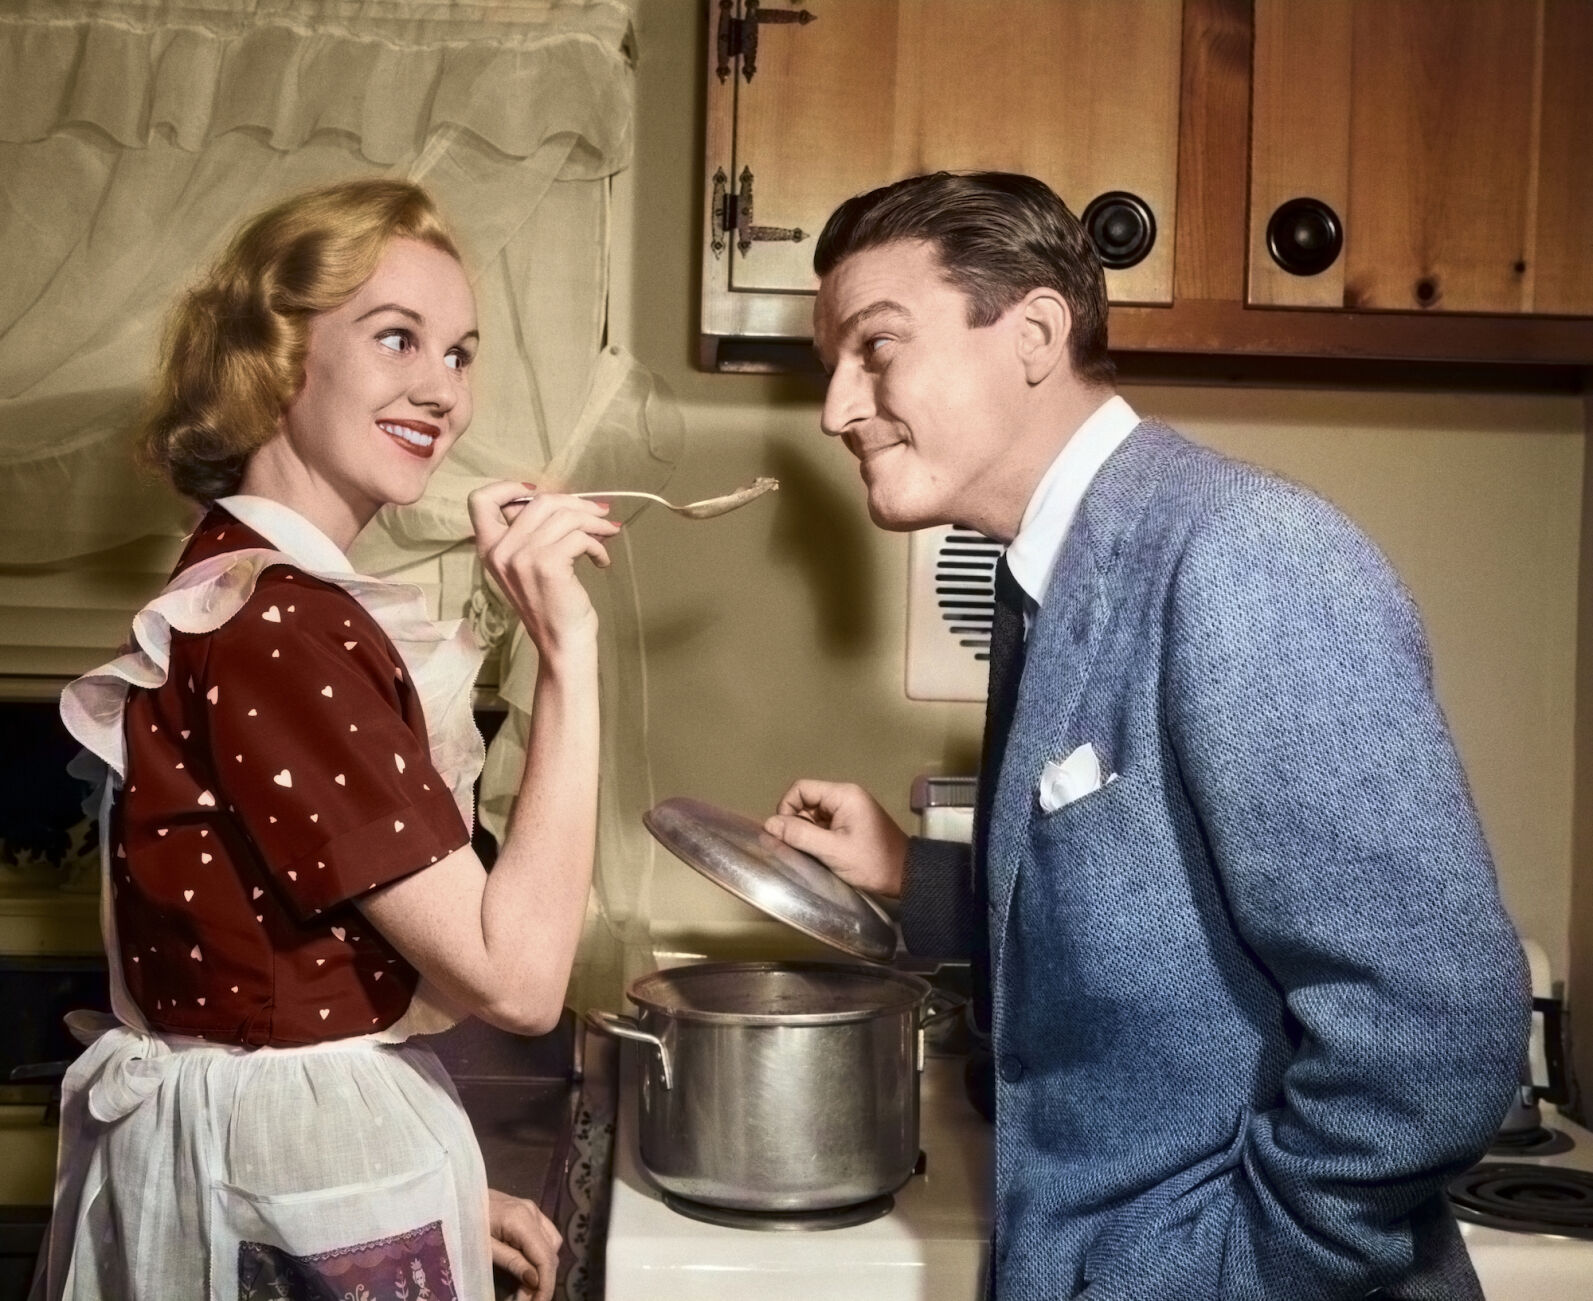 Tradwives promote a lifestyle that evokes the 1950s, but not without controversy News waaytv